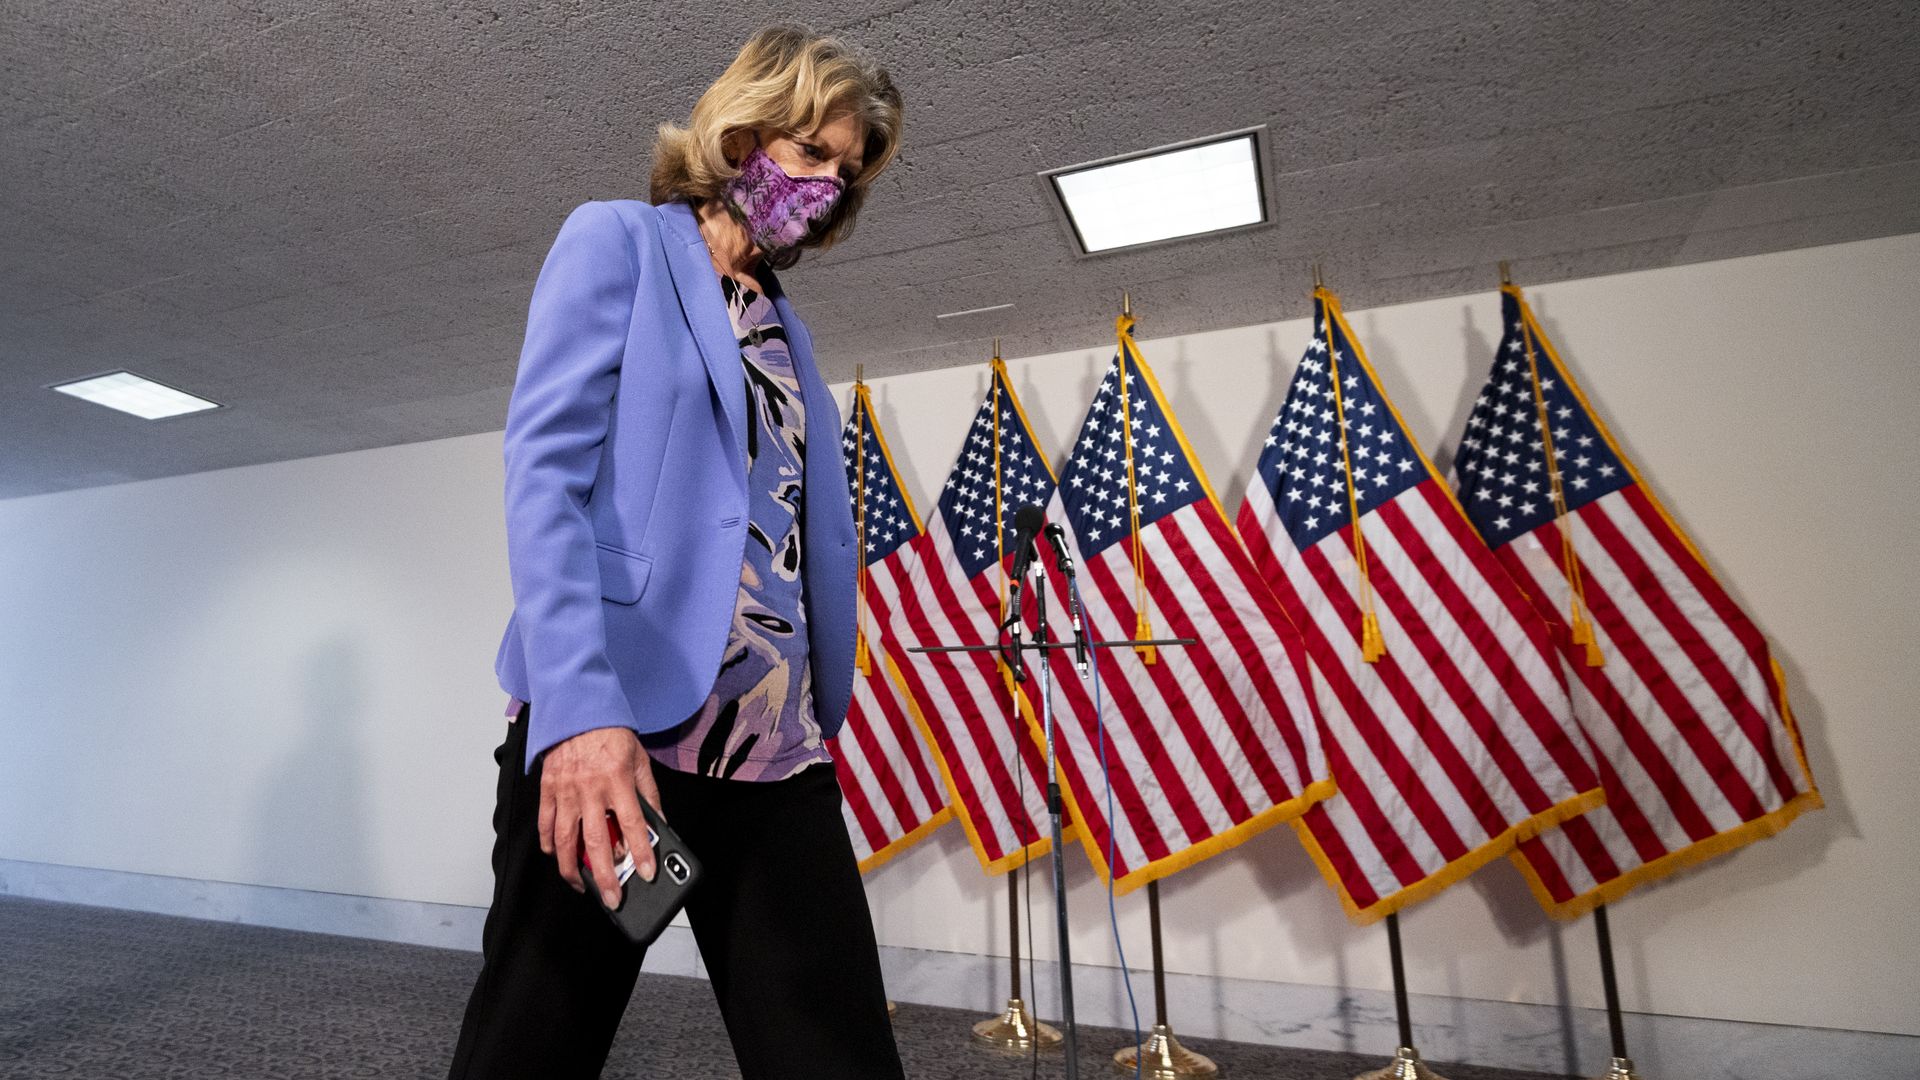 Murkowski in front of Flags.